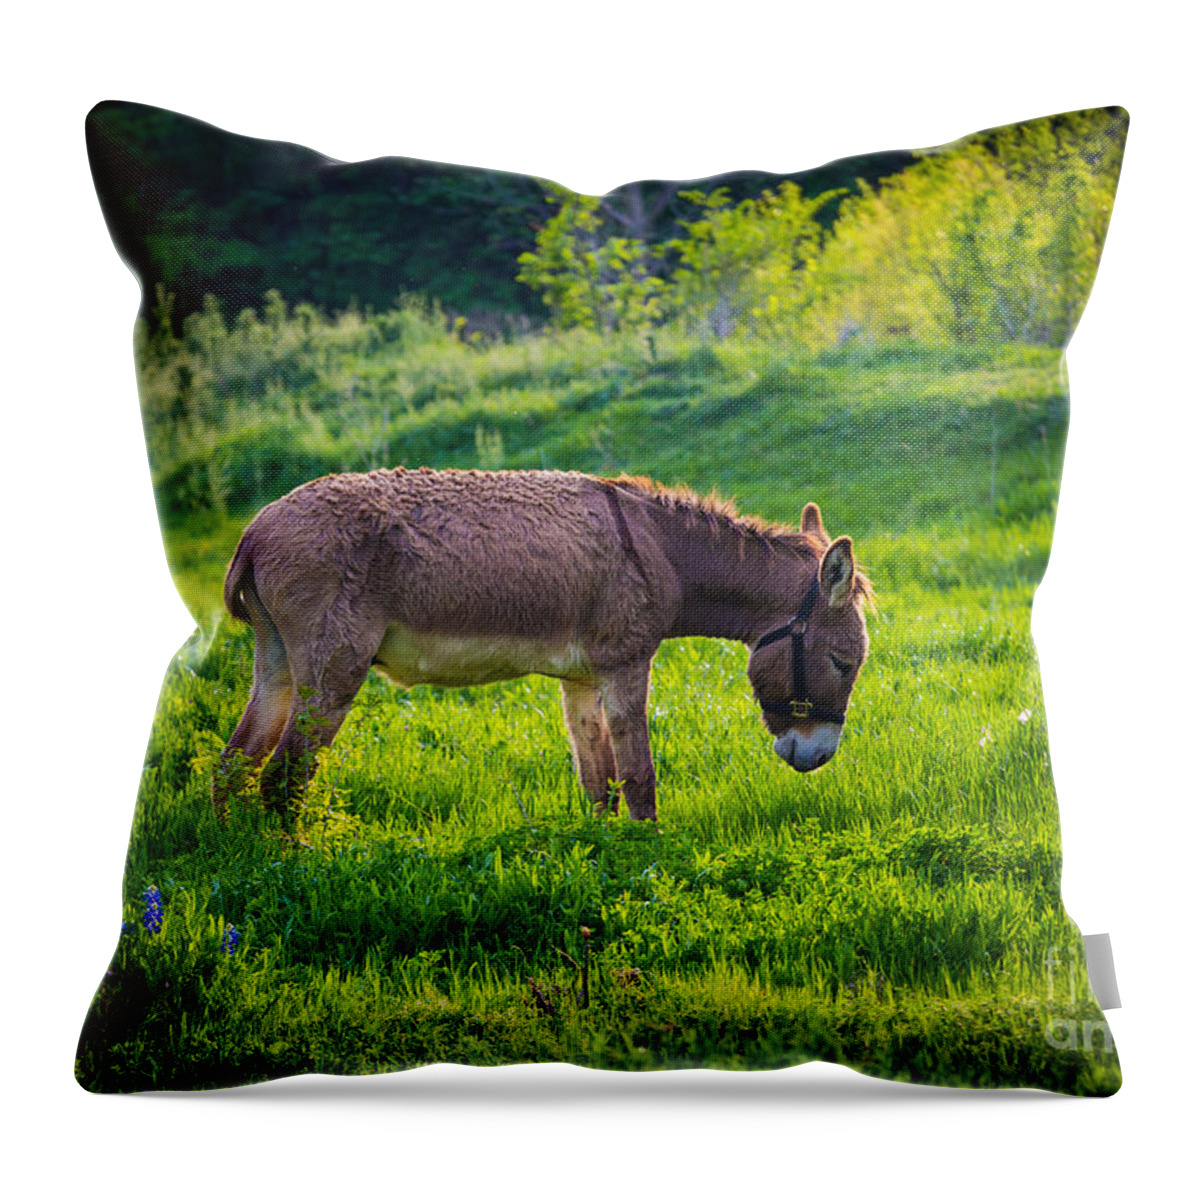 America Throw Pillow featuring the photograph Eeyore's Gloomy Place by Inge Johnsson